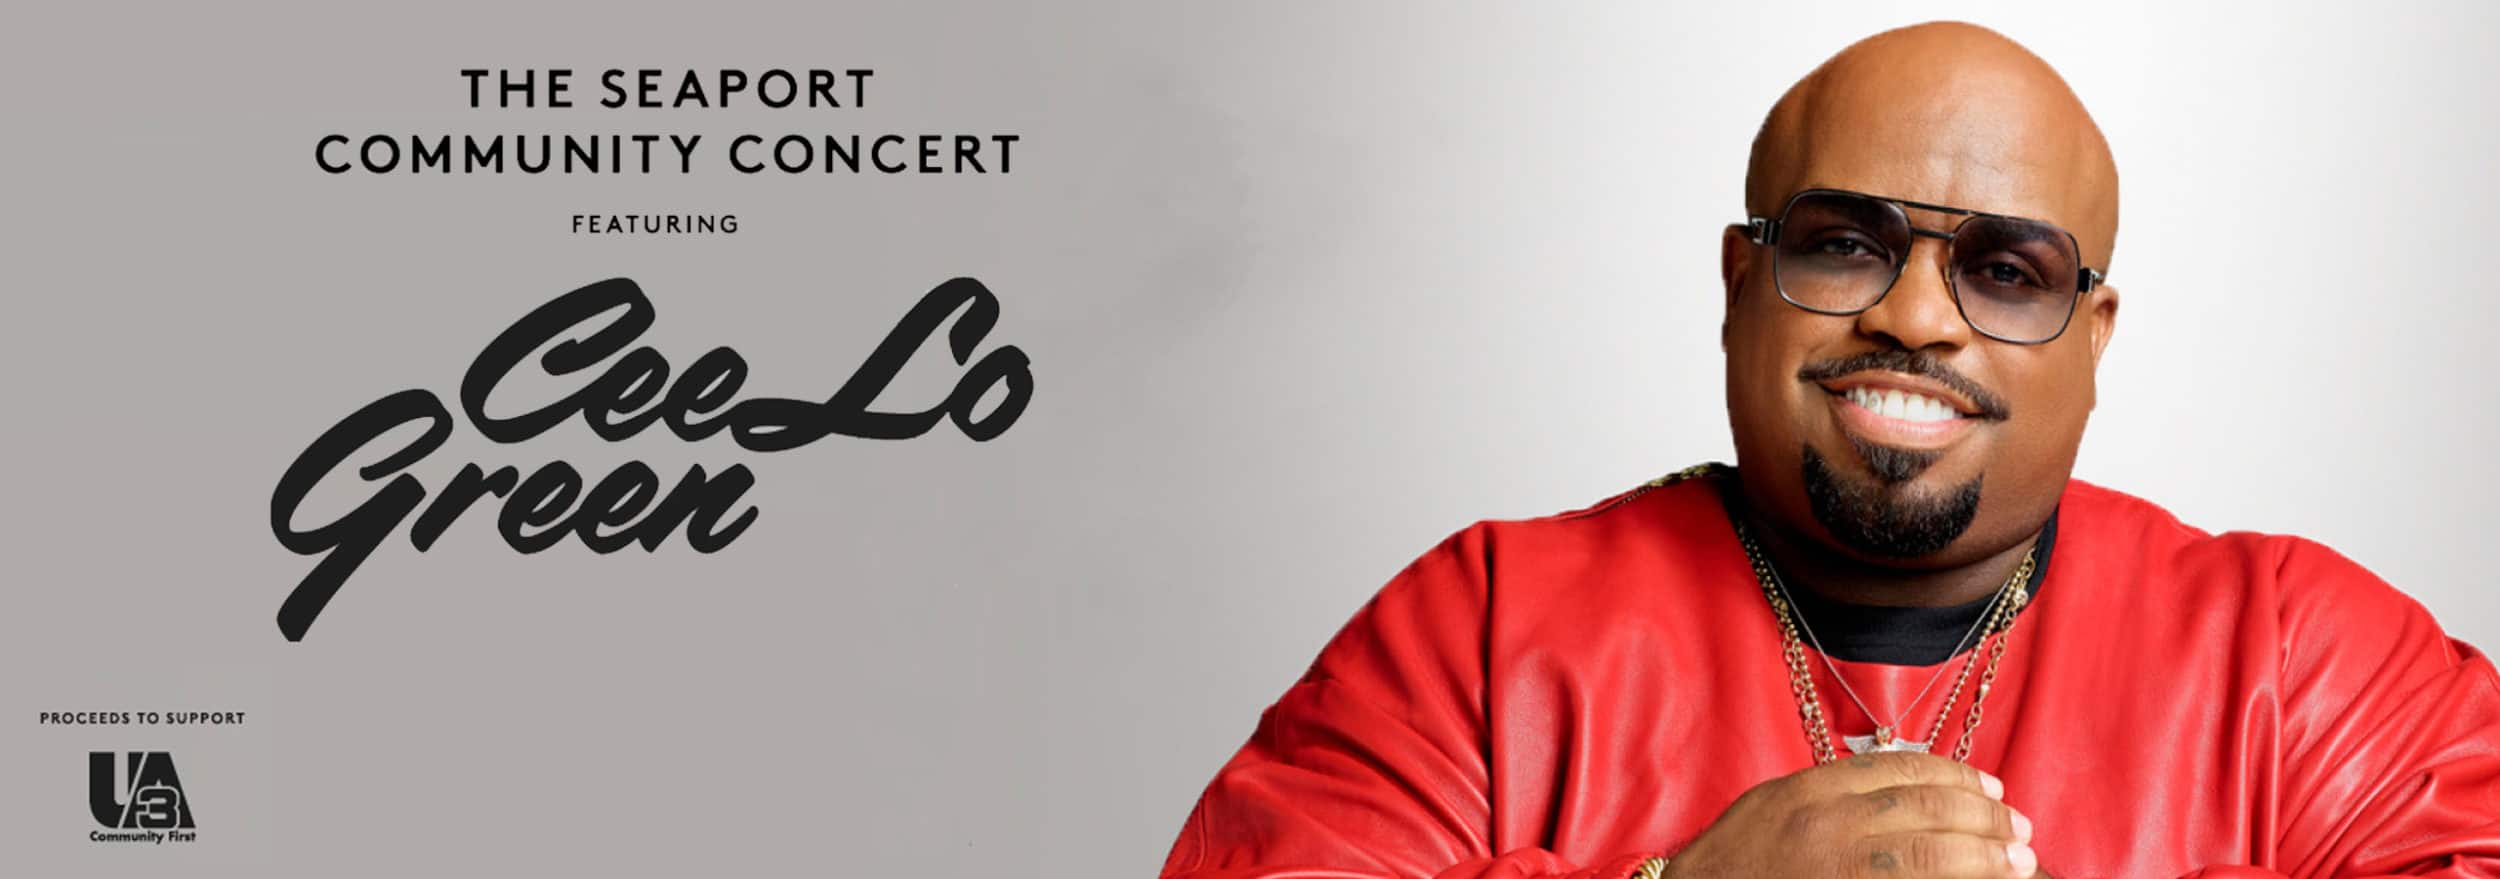 The Seaport Community Concert Featuring CeeLo Green